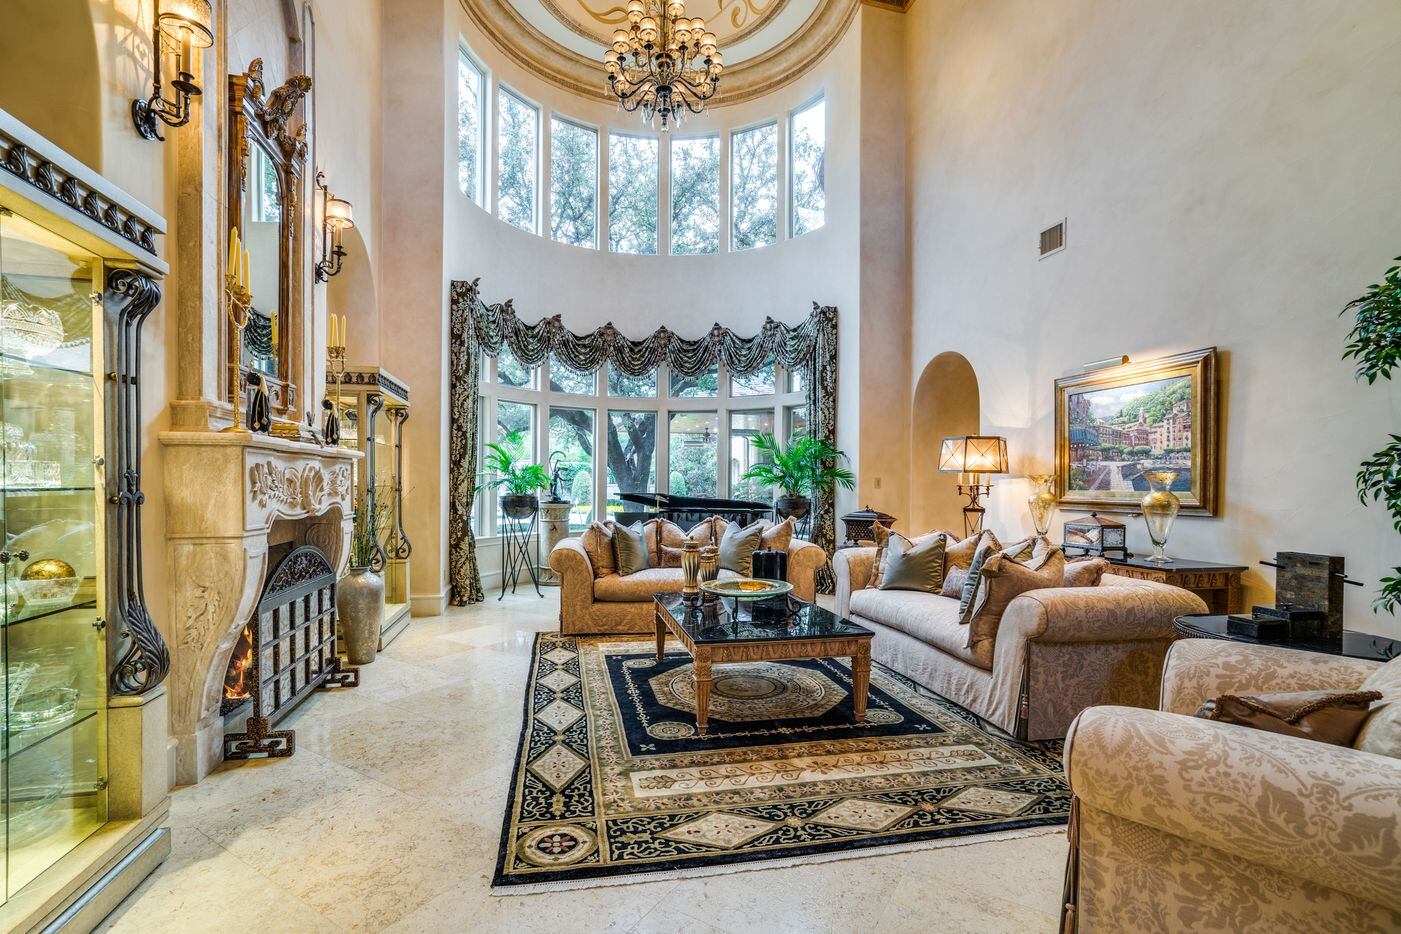 Take a look at the home at 5112 Palomar Lane in Dallas.